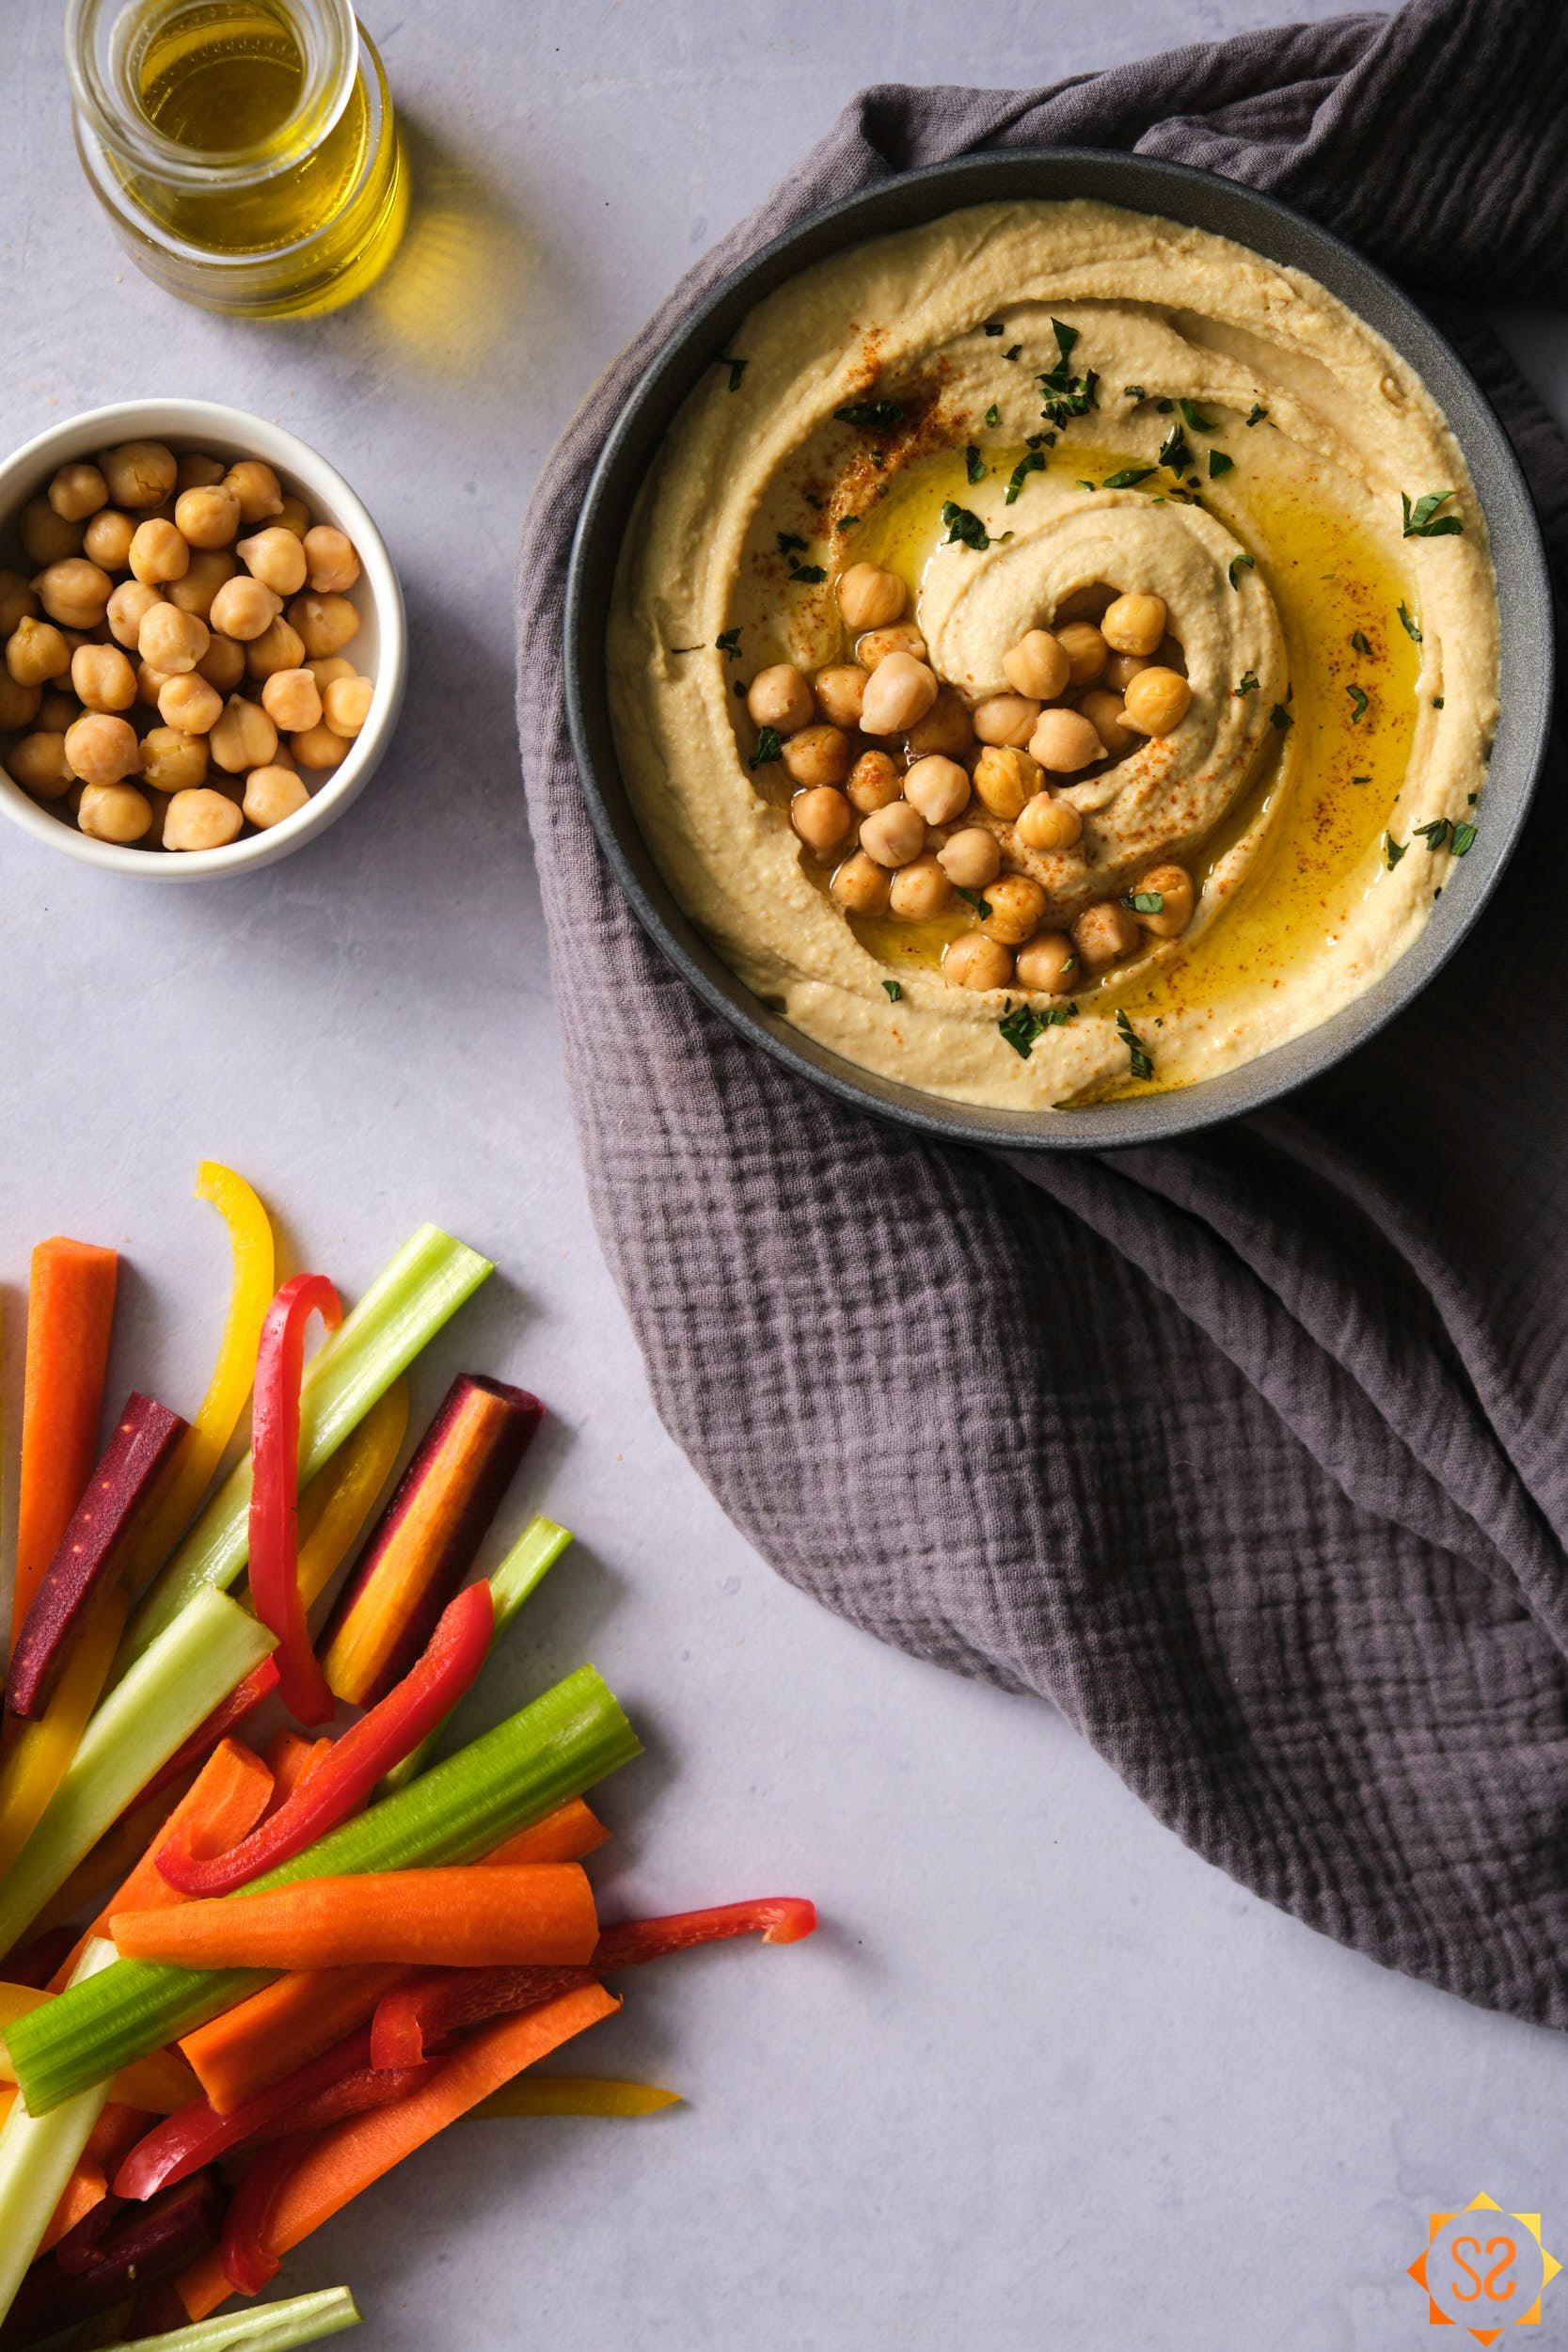 A bowl of hummus with sliced vegetables, garbanzo beans, and olive oil to the side